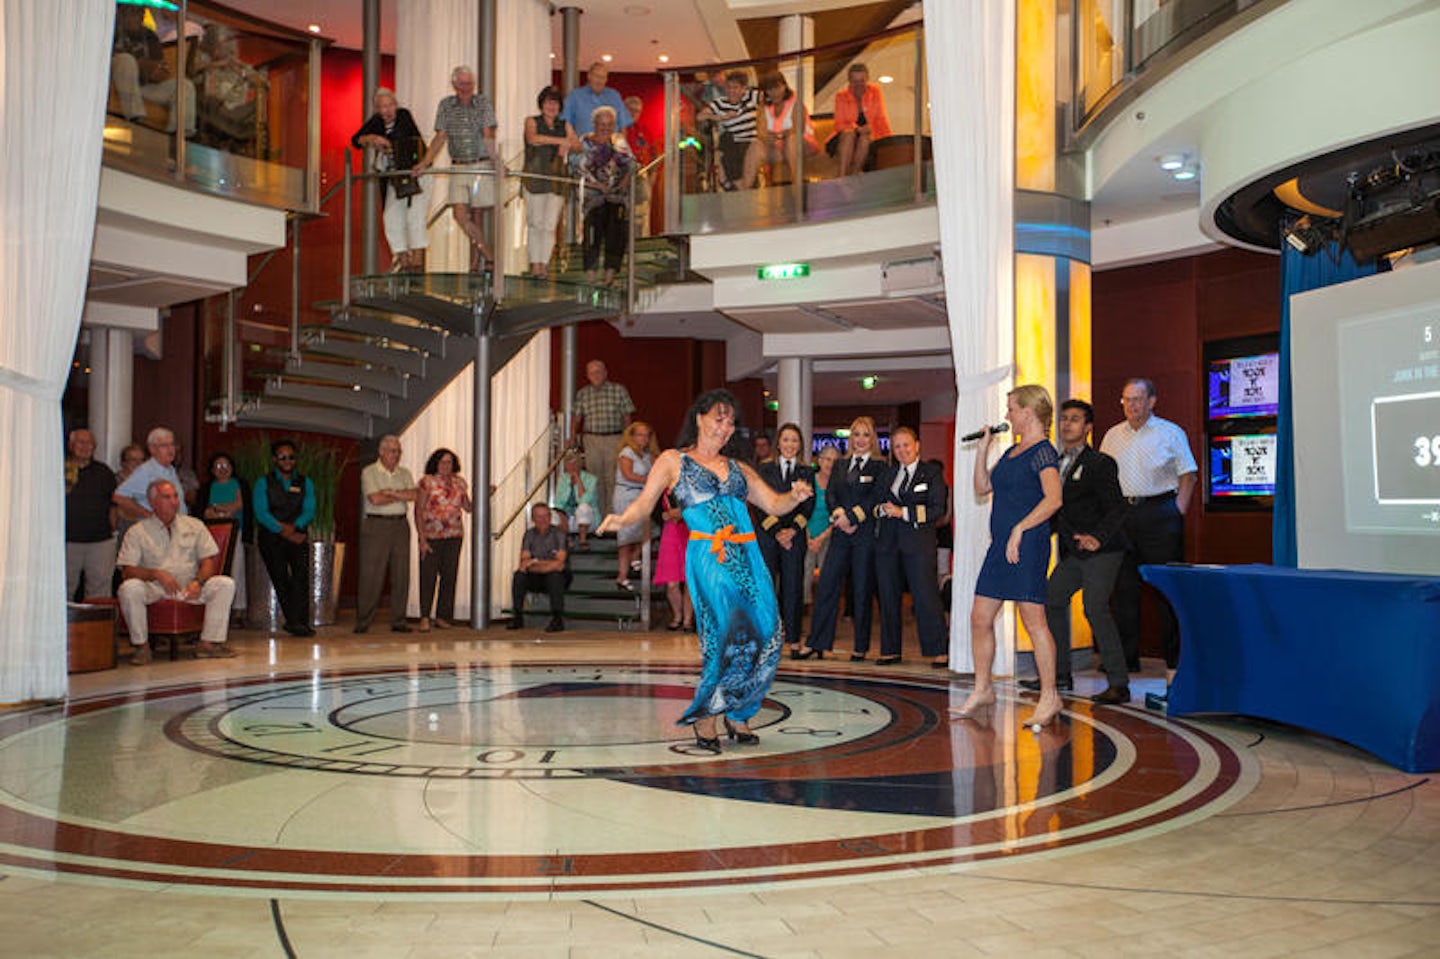 The Entertainment Court on Celebrity Equinox